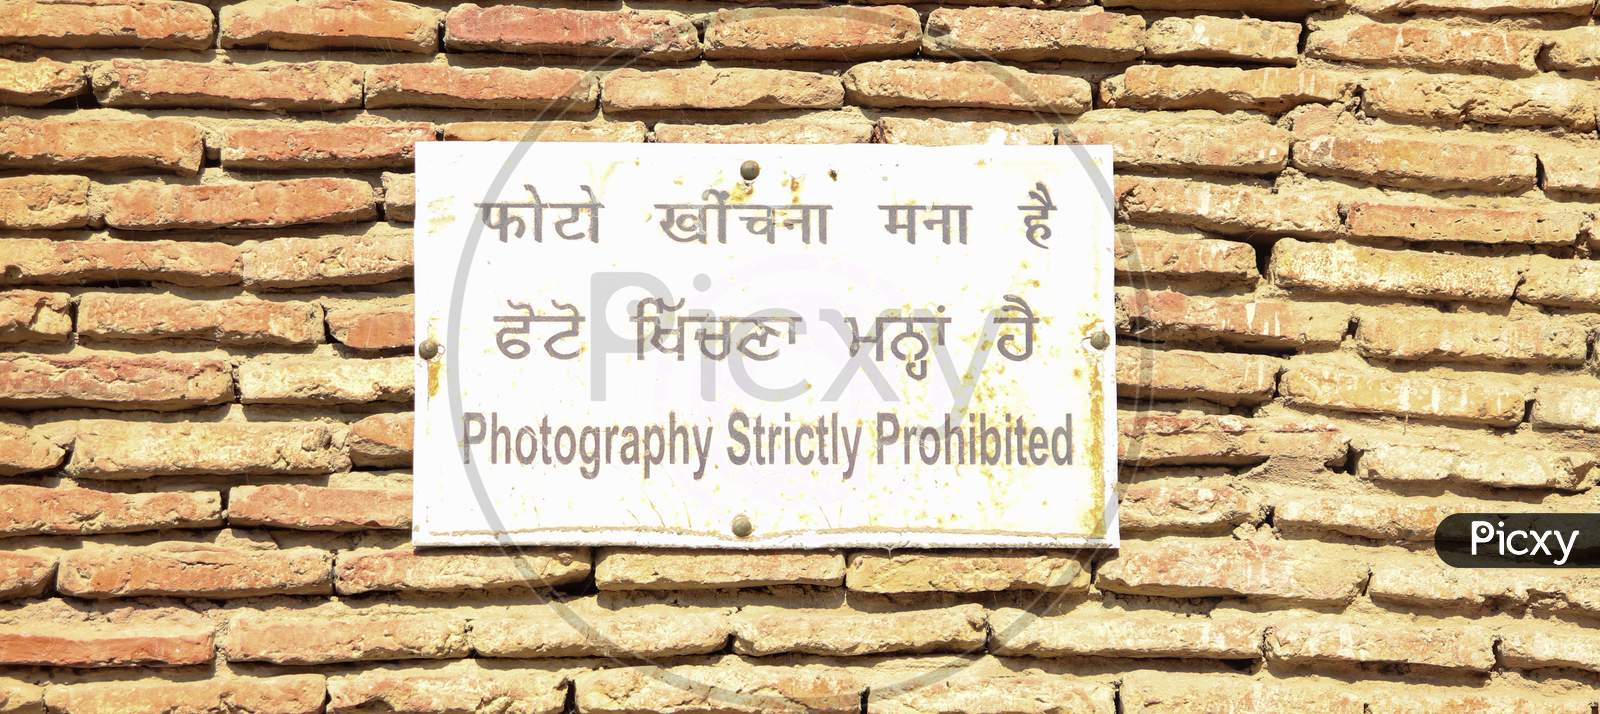 An Instruction Plate Stating 'Photography Strictly Prohibited'